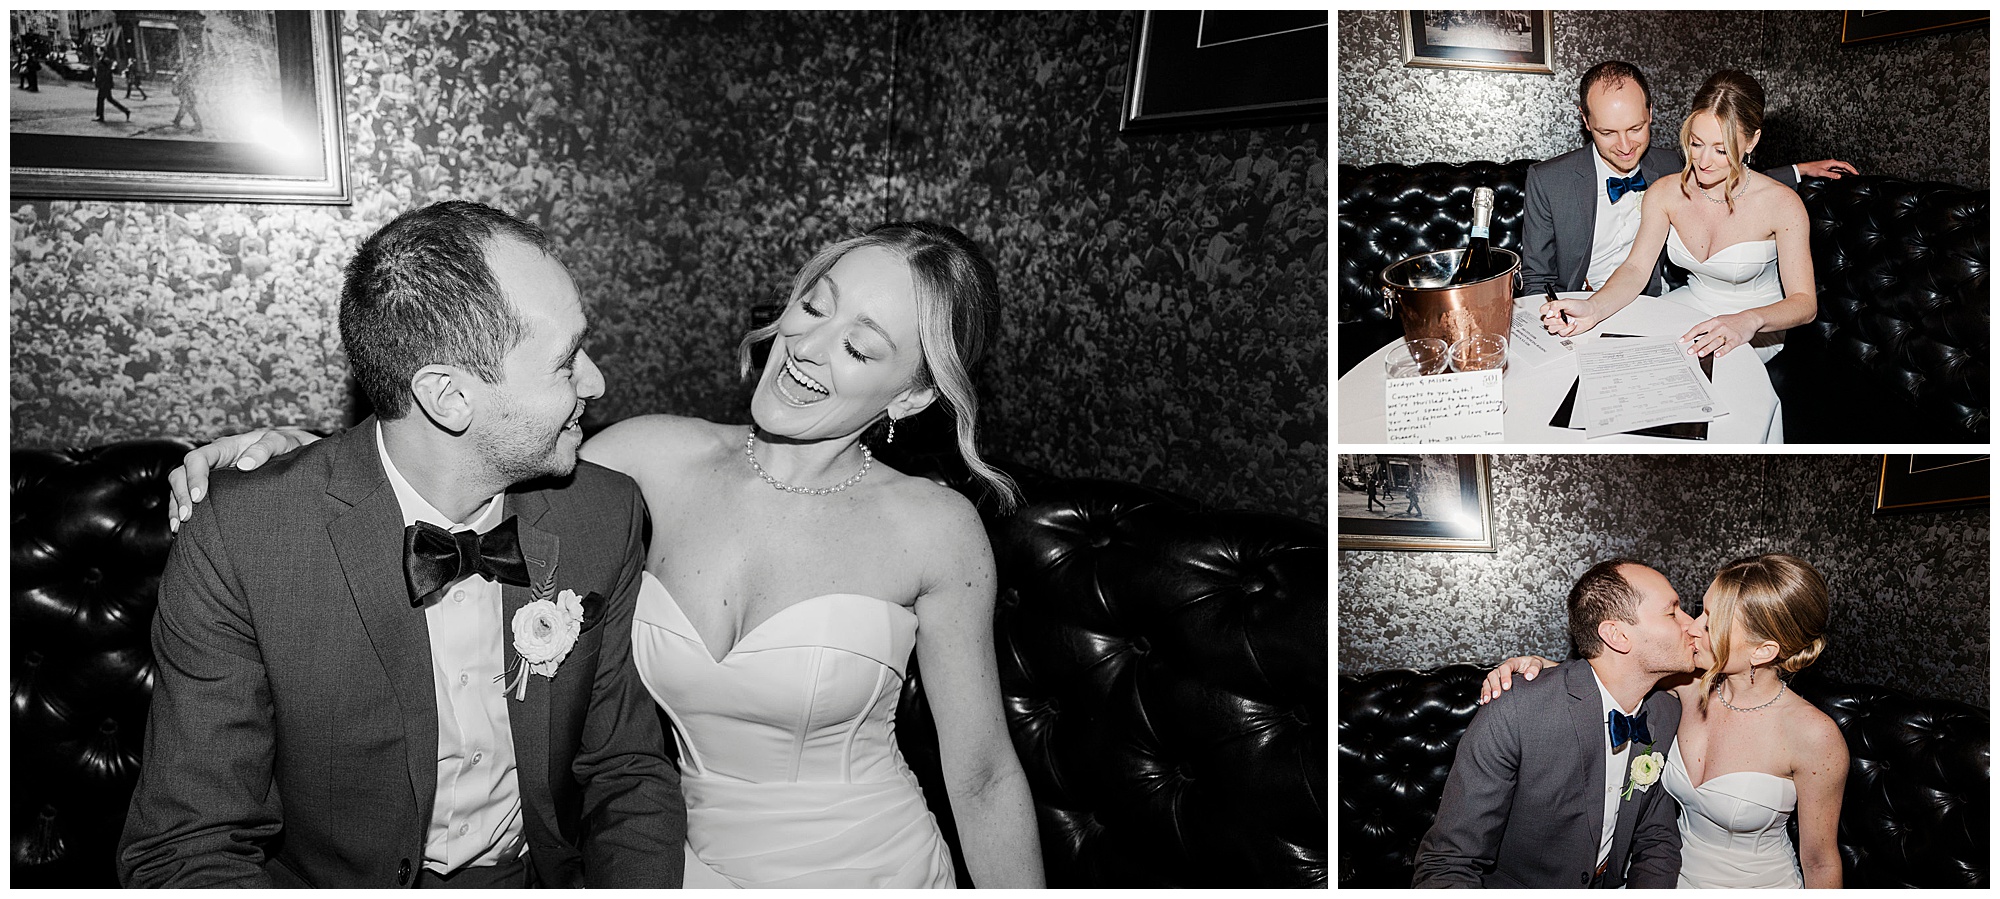 Personal new york wedding at 501 union